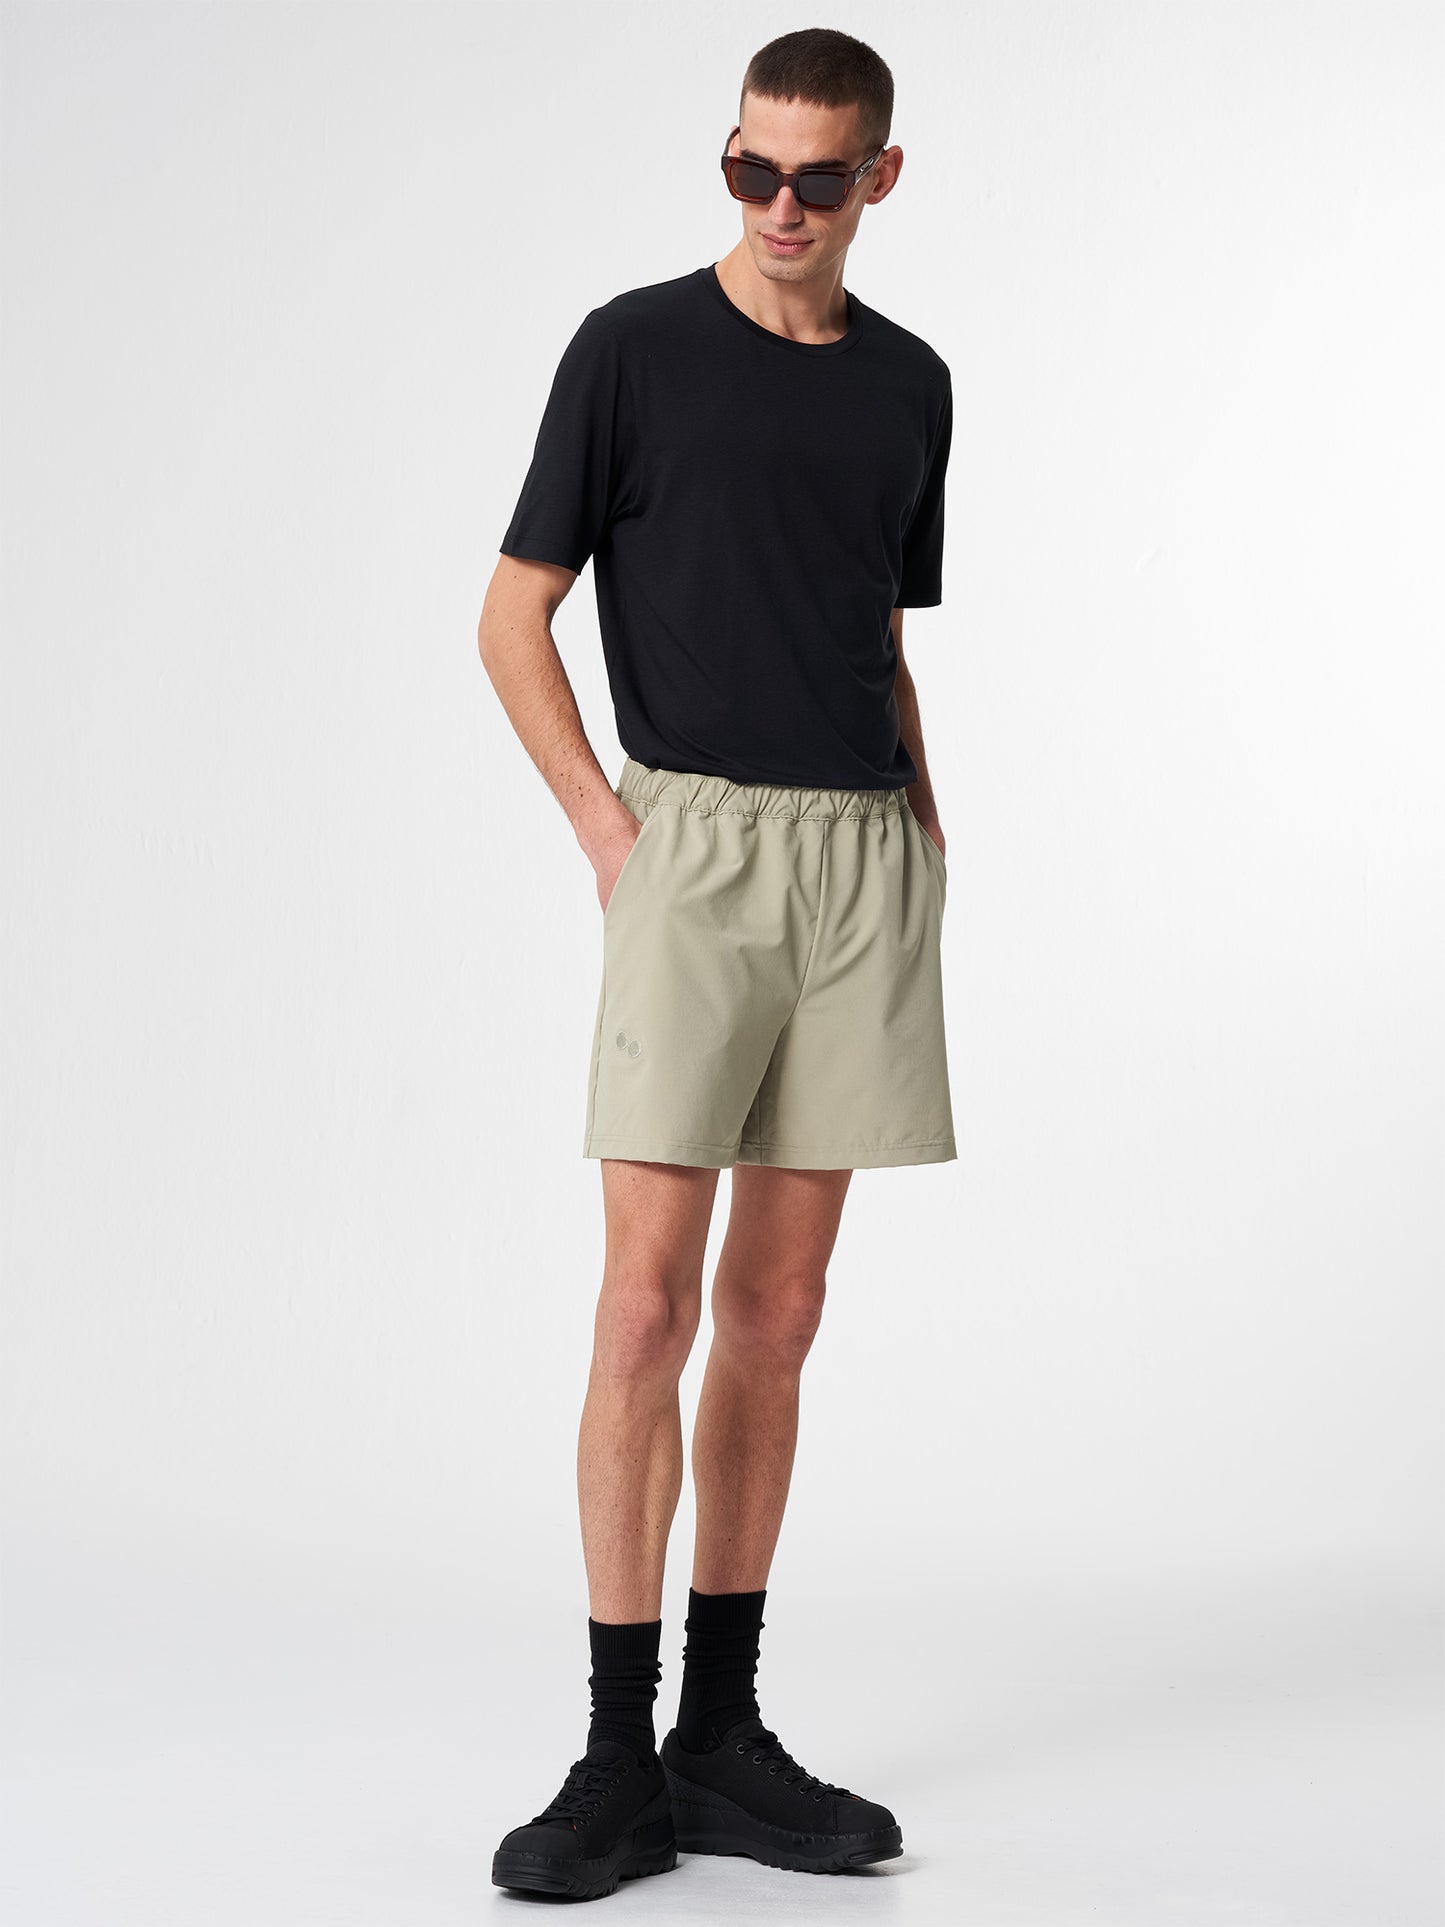 pinqponq-Active-Shorts-Reed-Olive-unisex-model-front